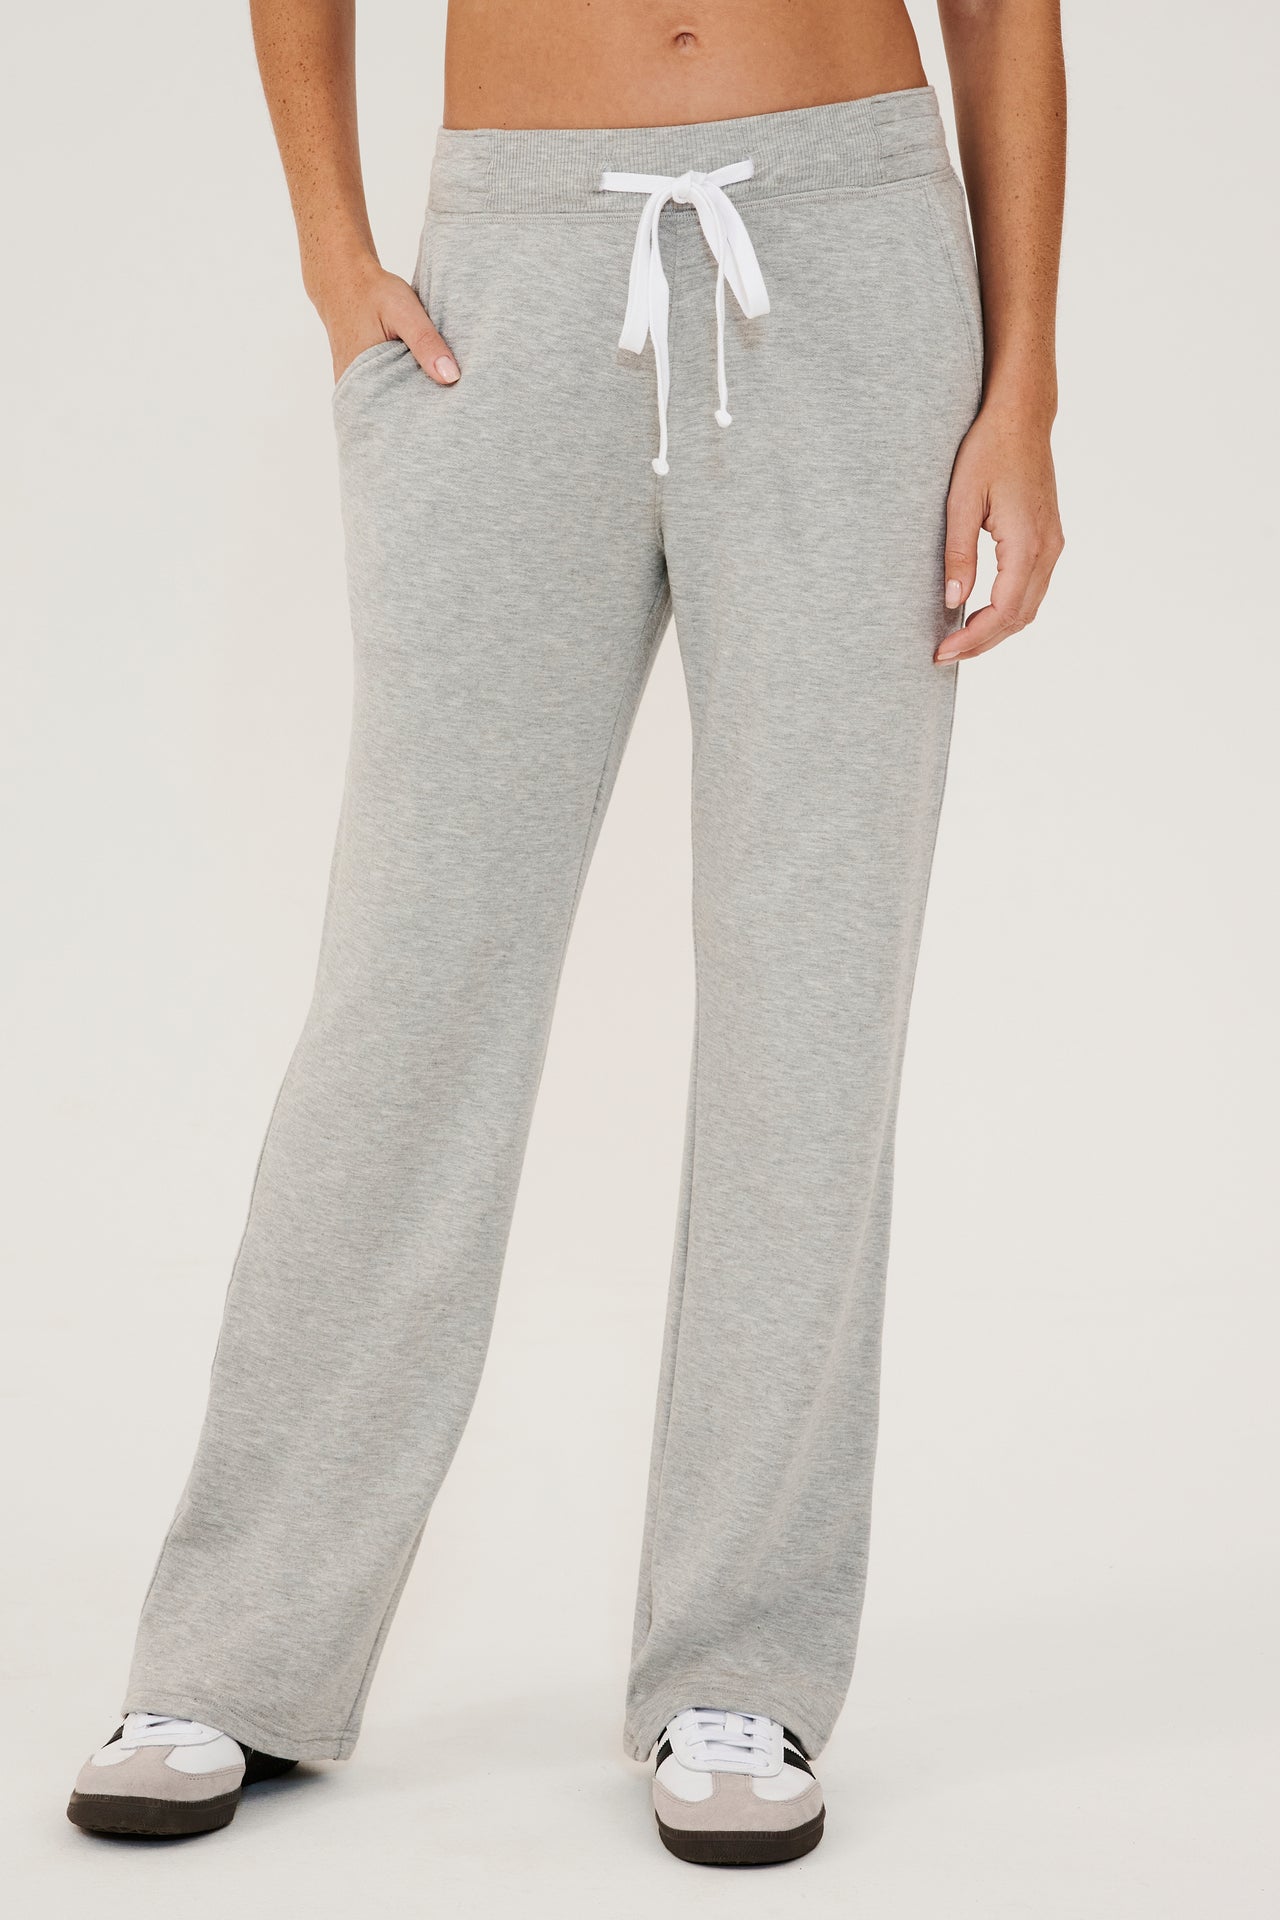 Front view of woman  wearing a light gray high rise wide leg relaxed fit sweatpant with side pockets and white drawstring. Paired with white and grey shoes with black stripes.